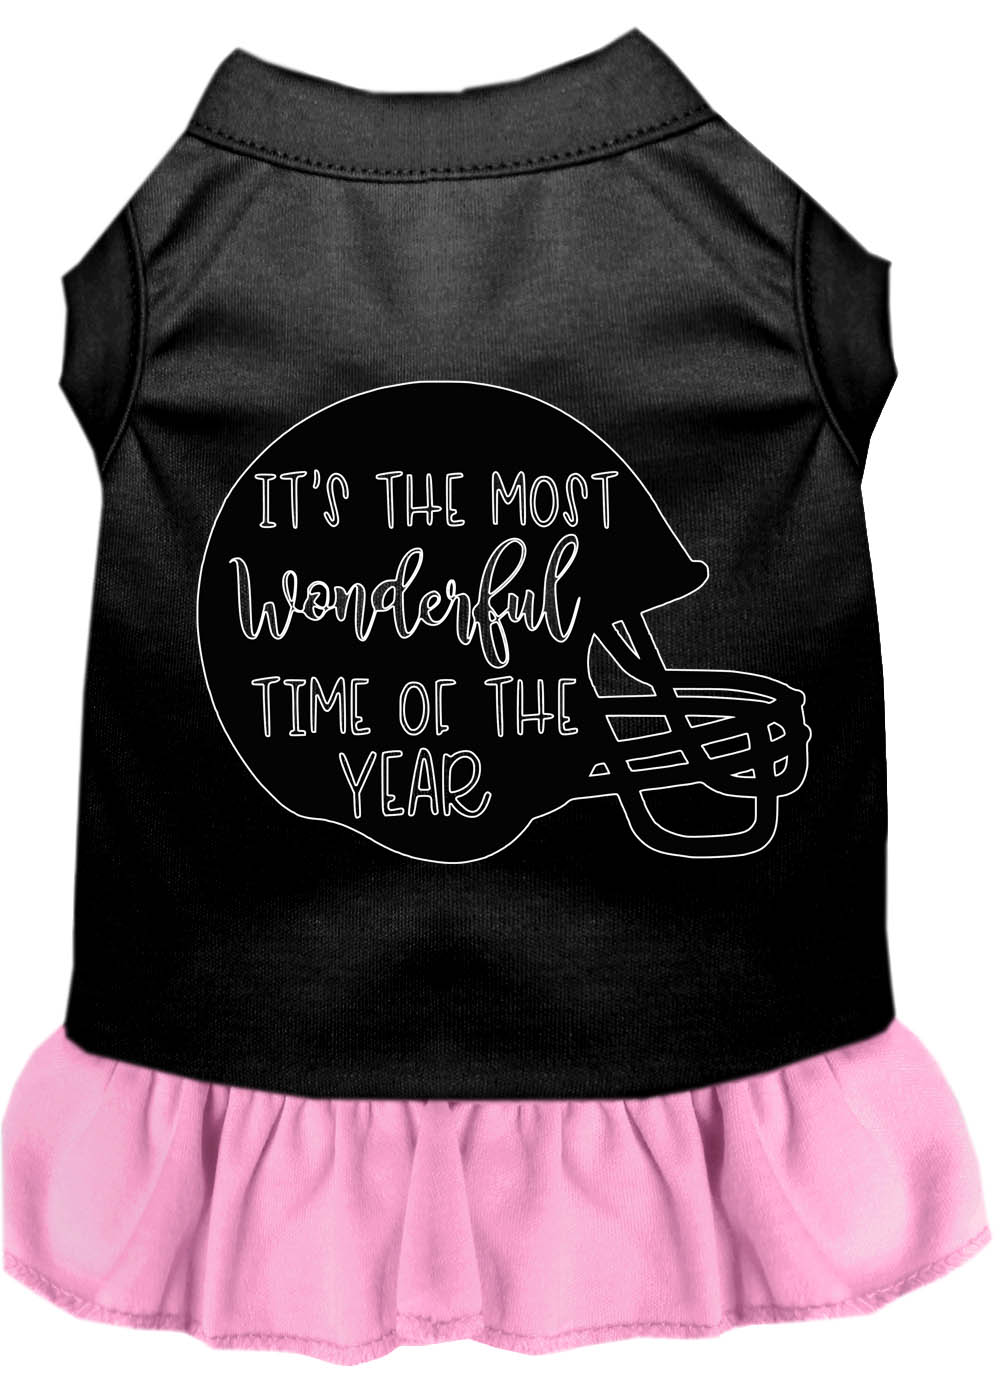 Most Wonderful Time of the Year (Football) Screen Print Dog Dress Black with Light Pink Sm